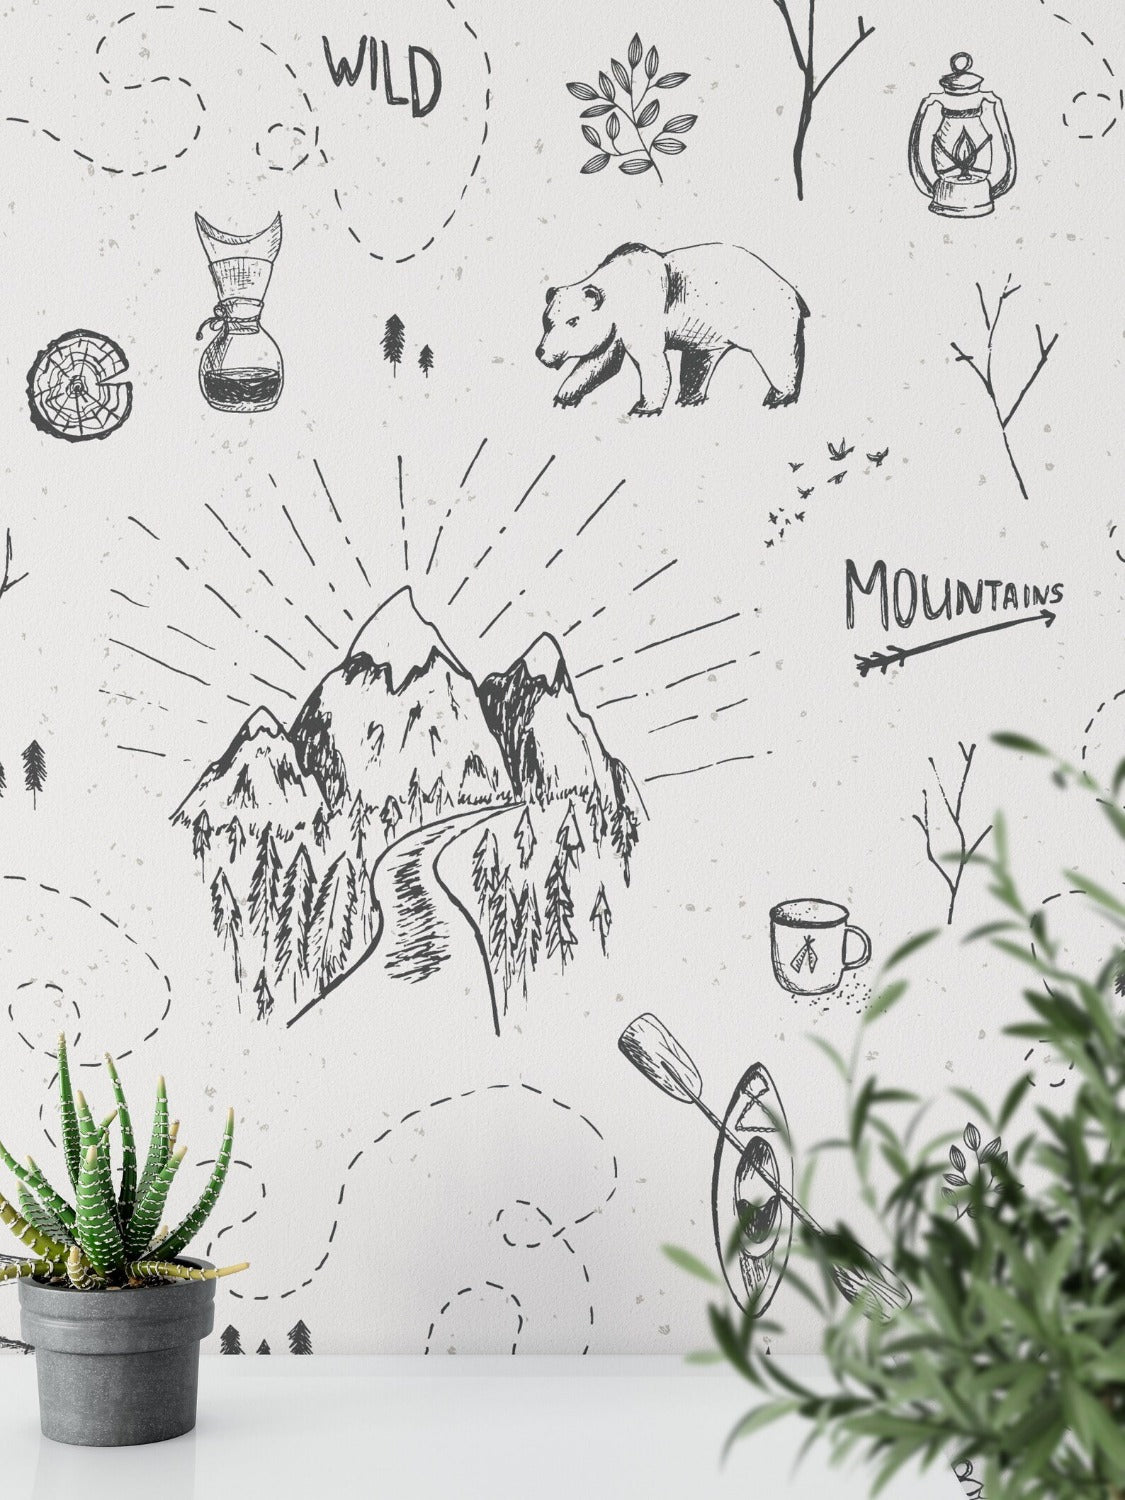 A whimsically designed bedroom with the Big Adventure Kids Wallpaper depicting a black and white illustrated scene of outdoor activities and wildlife, including bears, tents, mountains, and trees, which creates a playful and adventurous vibe.